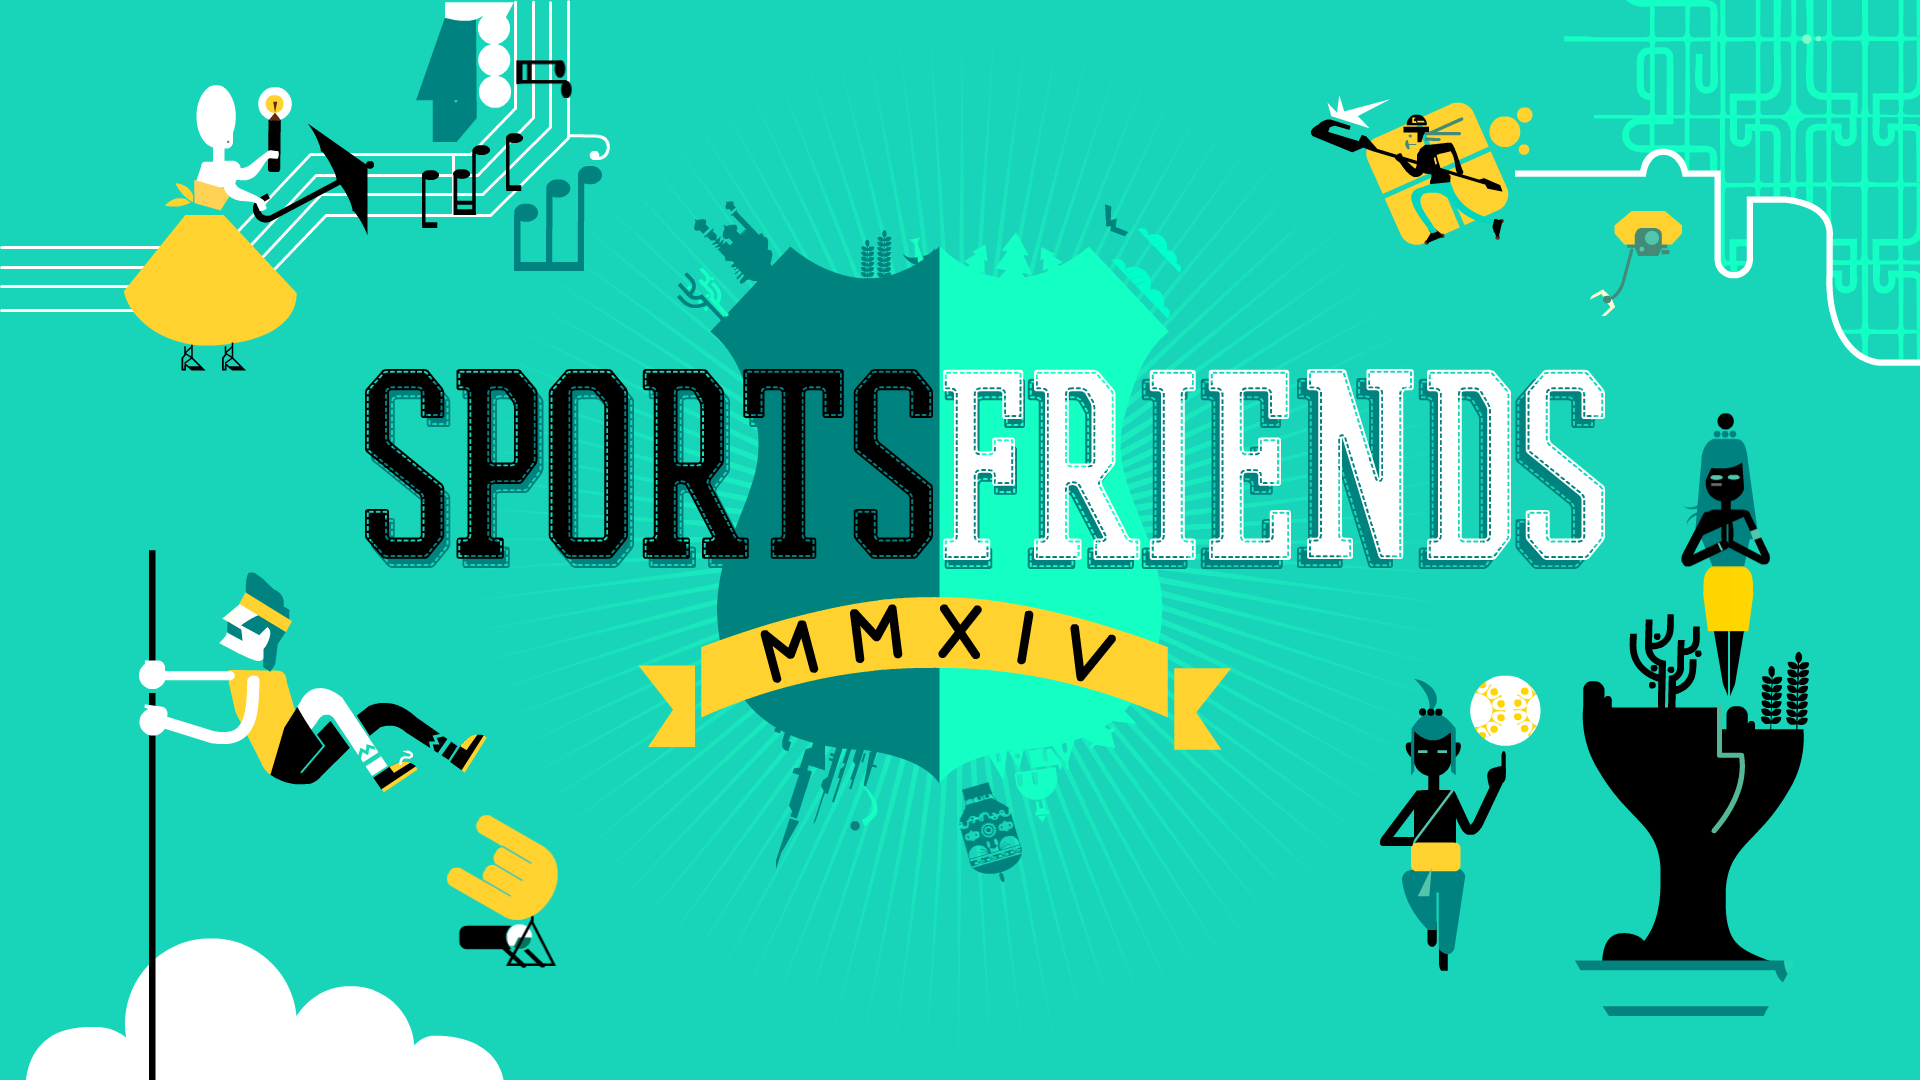 Sportsfriends goes free on May 29